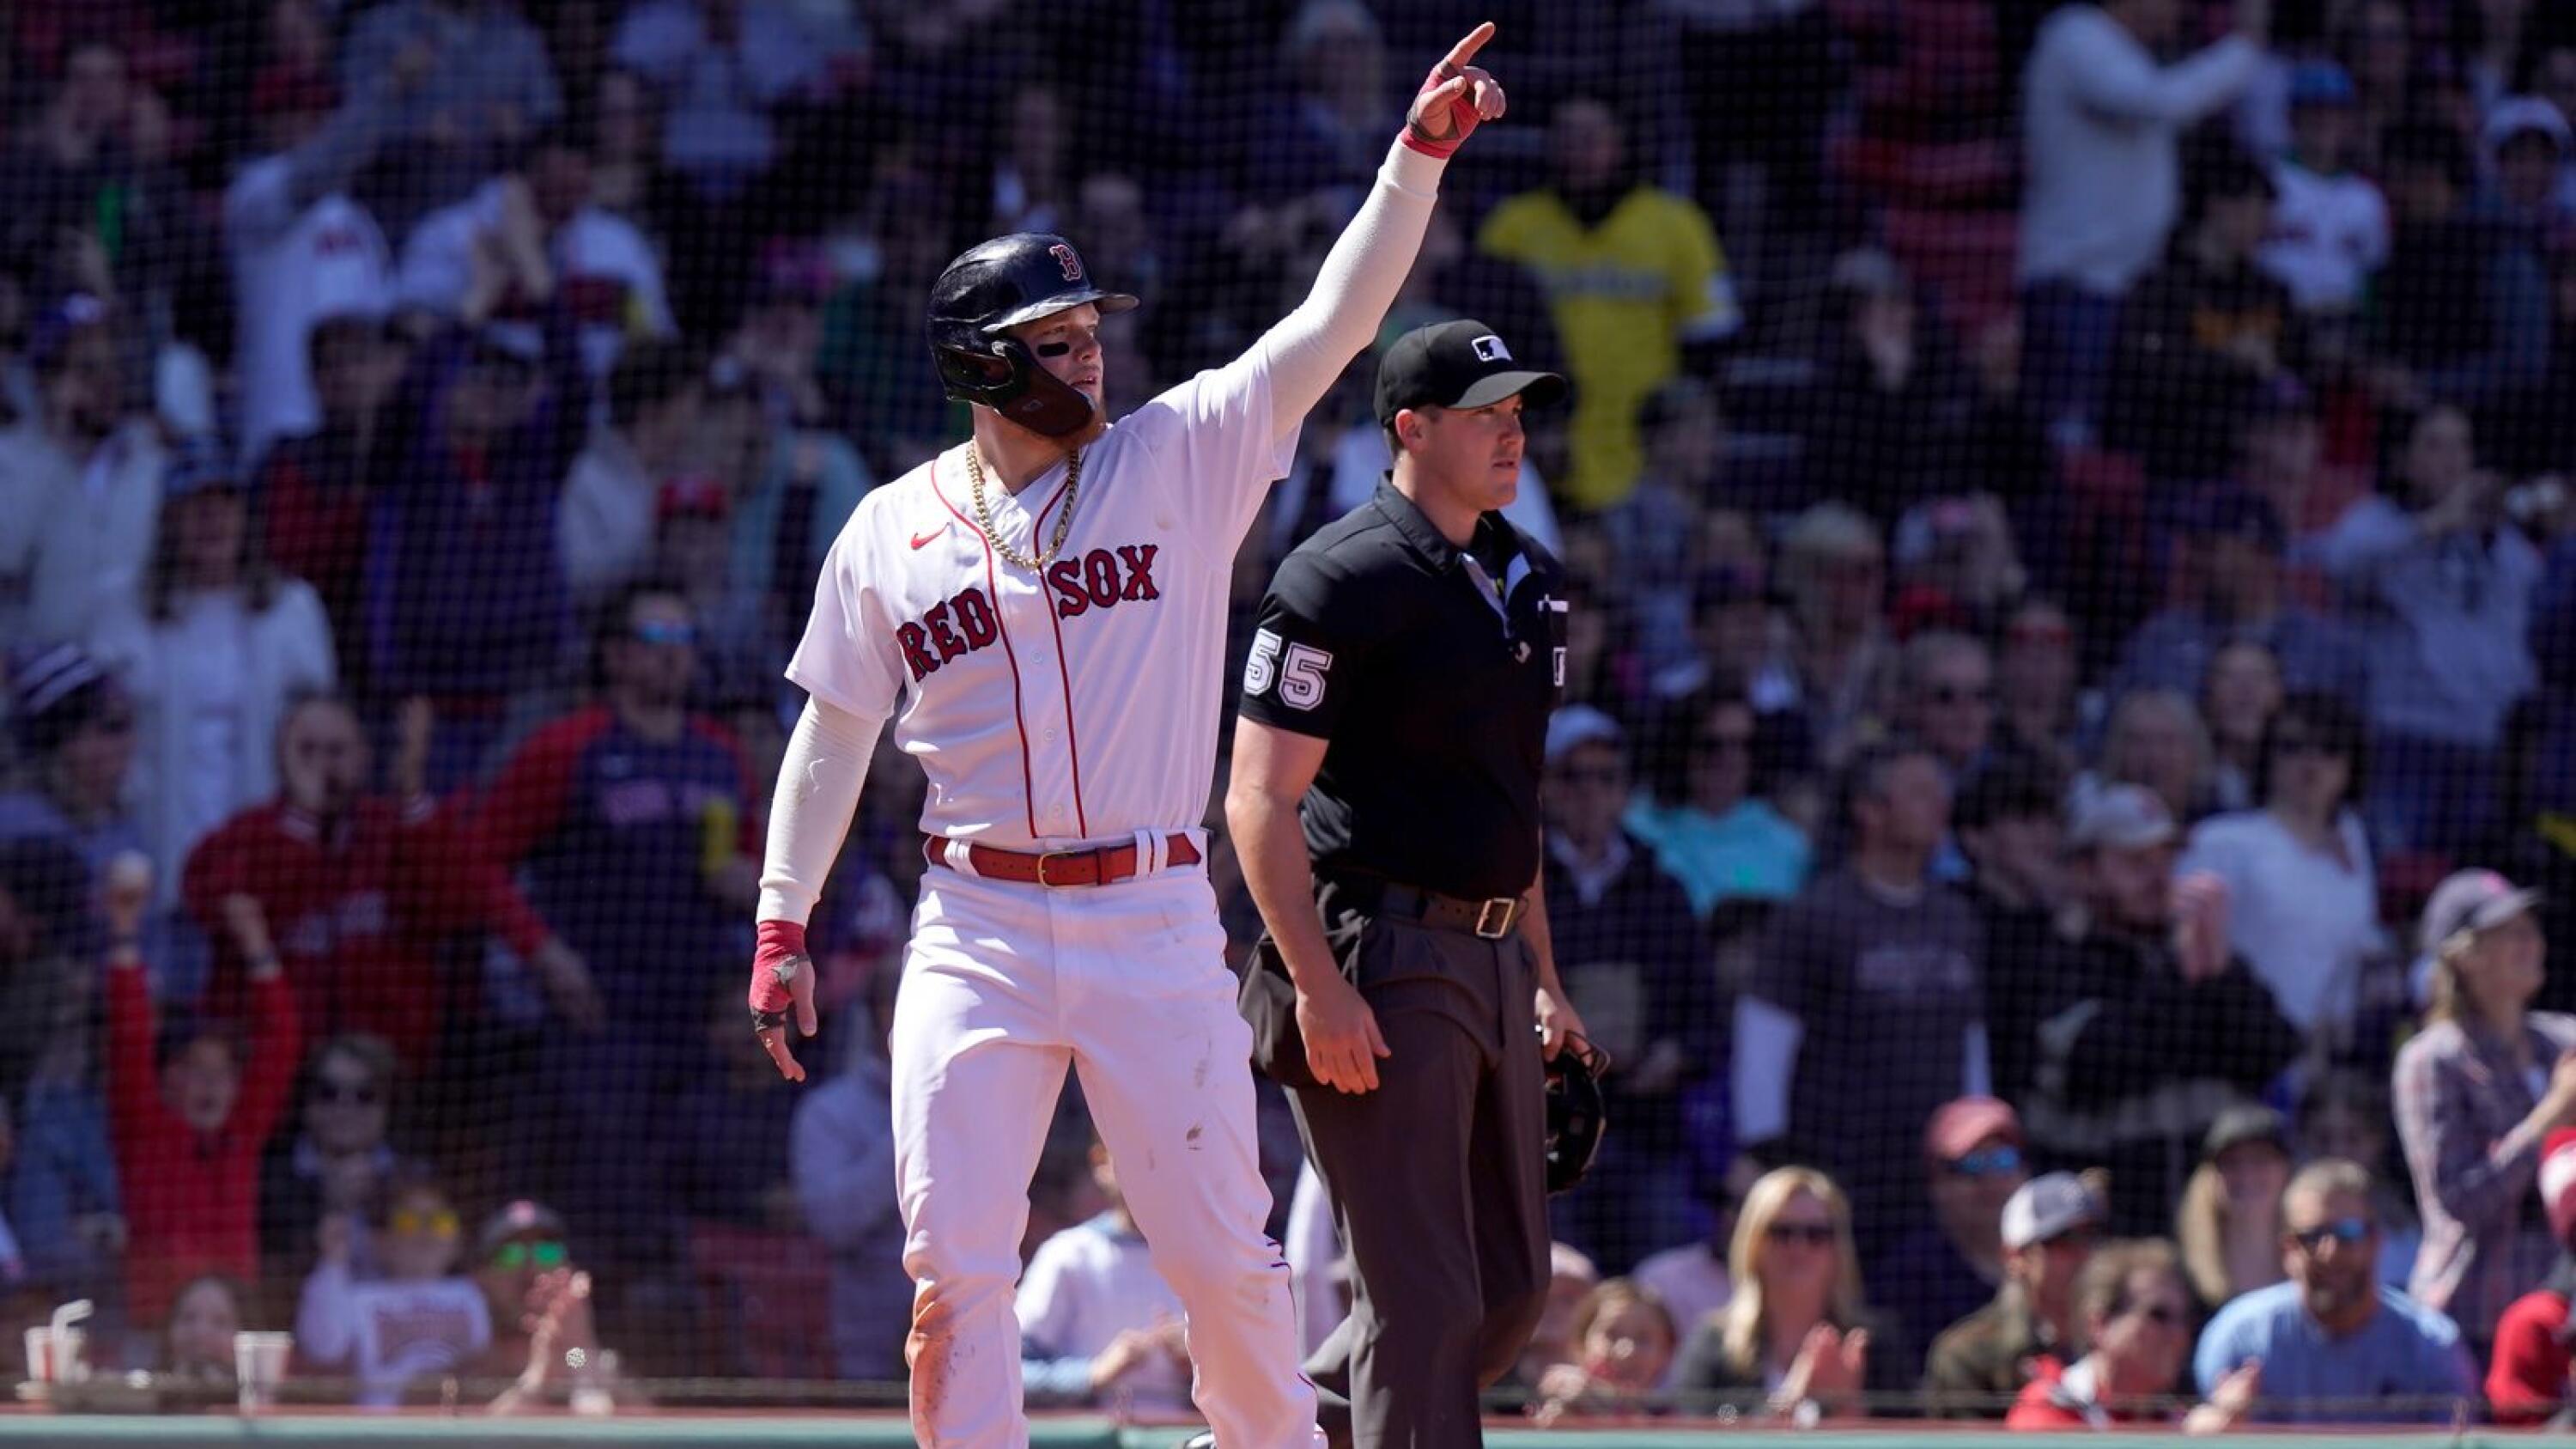 Boston Red Sox play the Minnesota Twins in home opener at Fenway Park